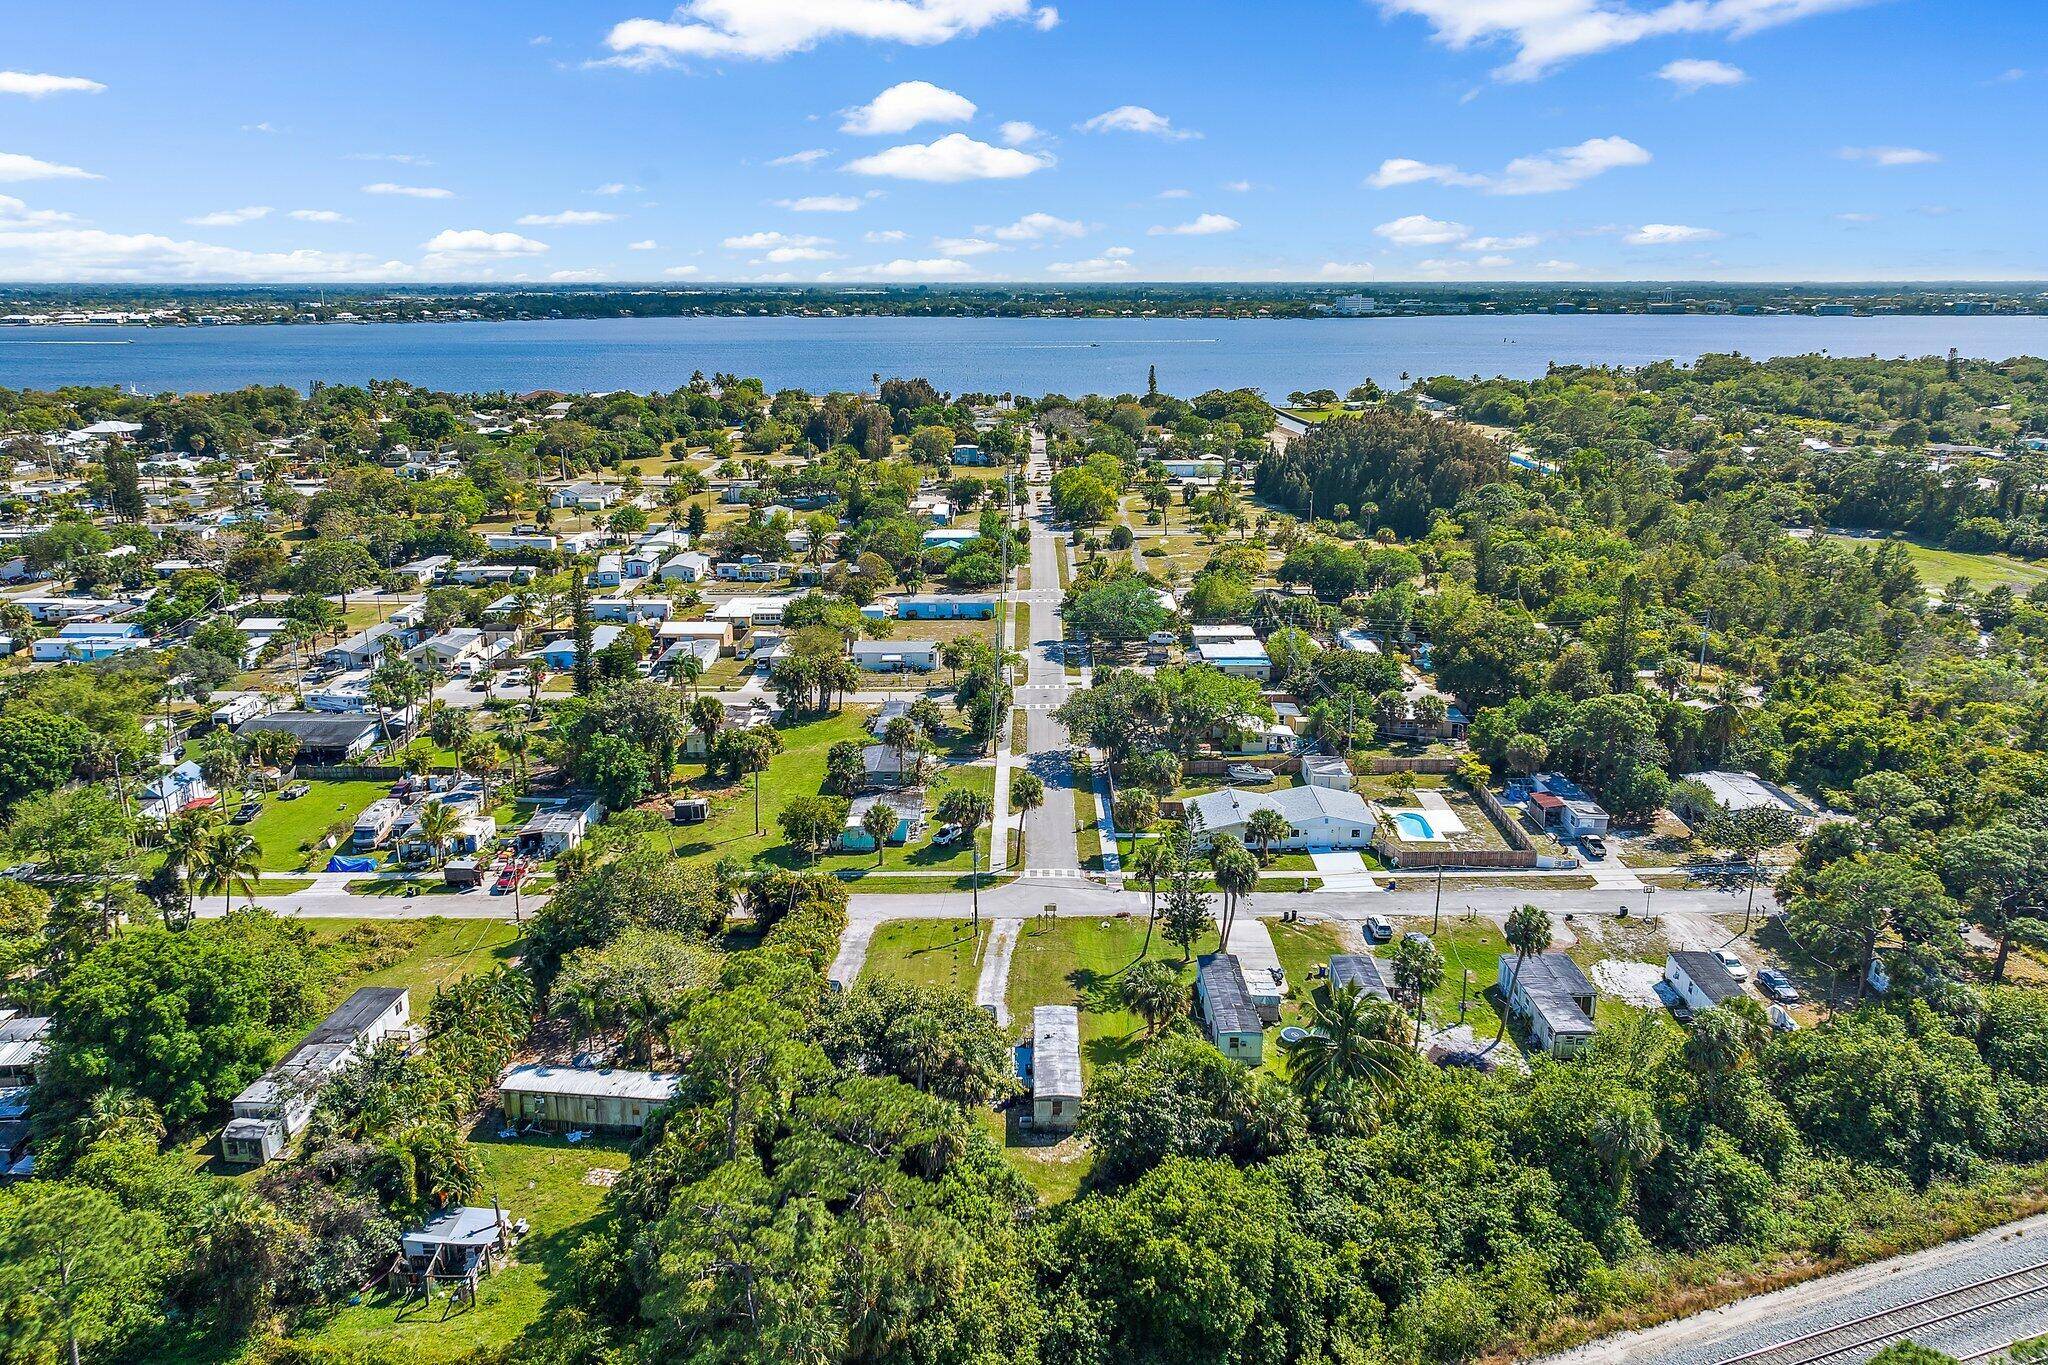 Welcome to the up and coming, quaint town of Rio, FL located in one of the tax benefit Opportunity Zones !